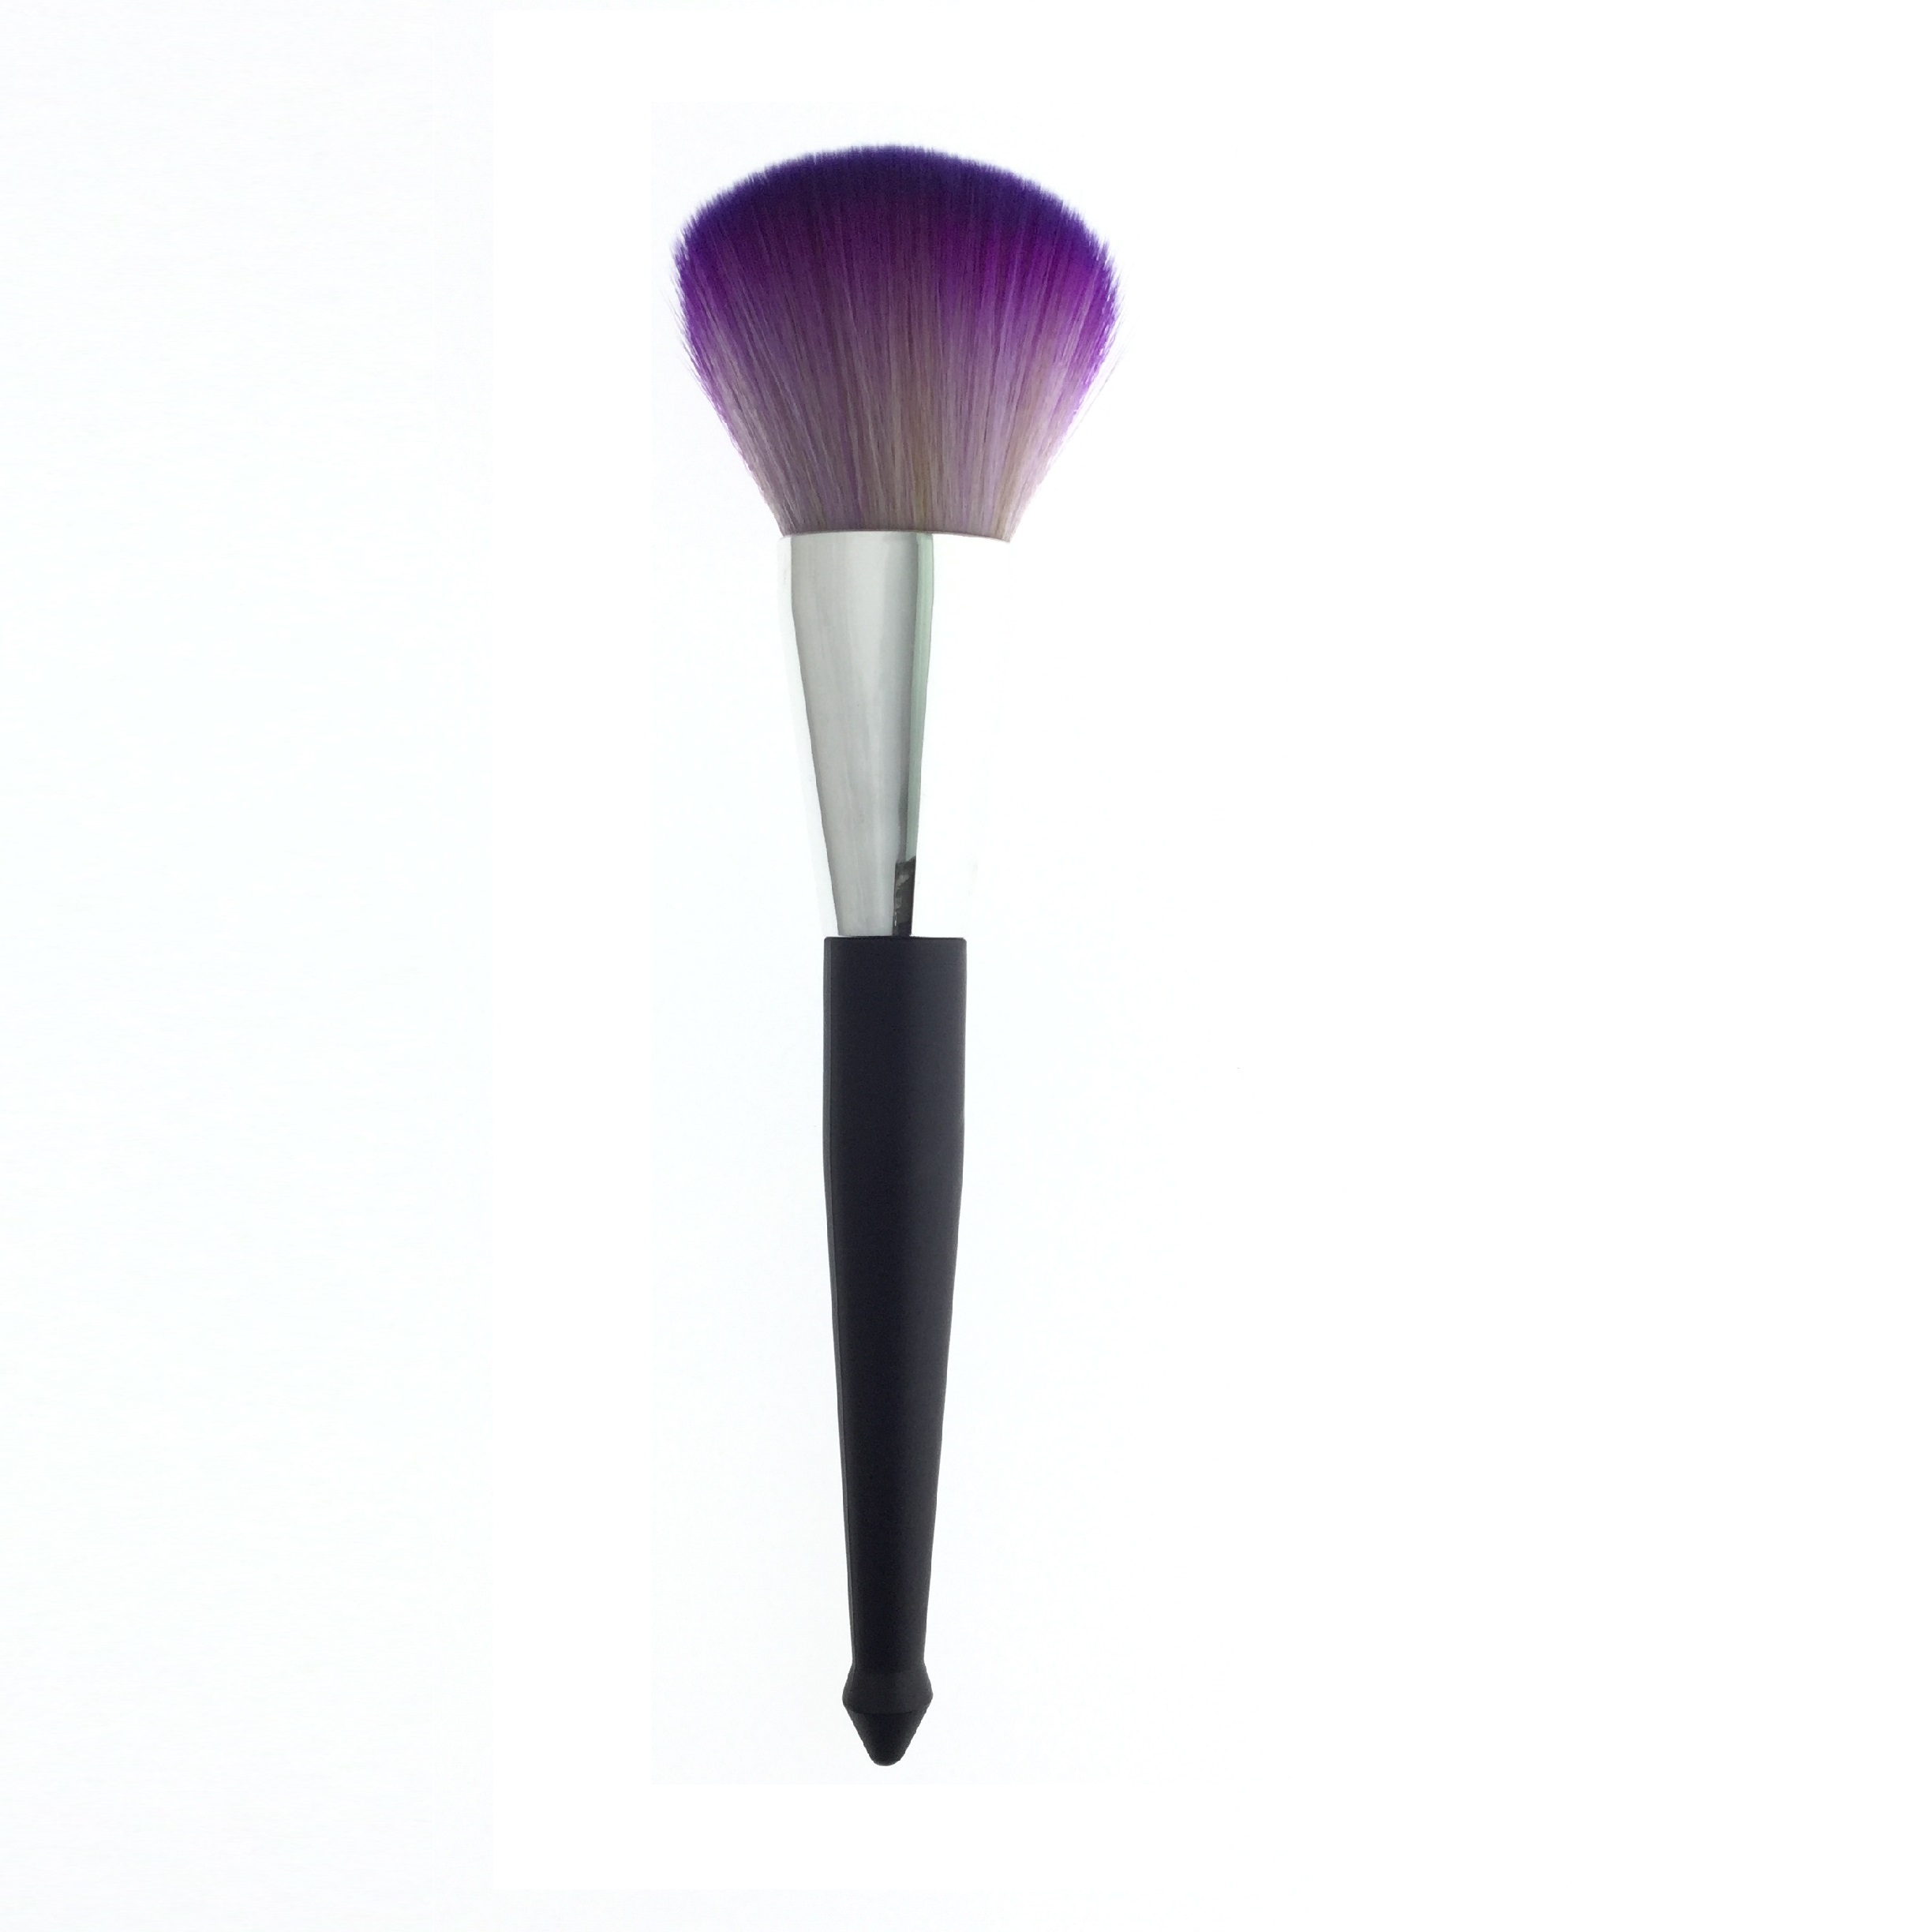 Lavendel-Rougepinsel, Power-Pinsel, Gesichts-Make-up-Pinsel